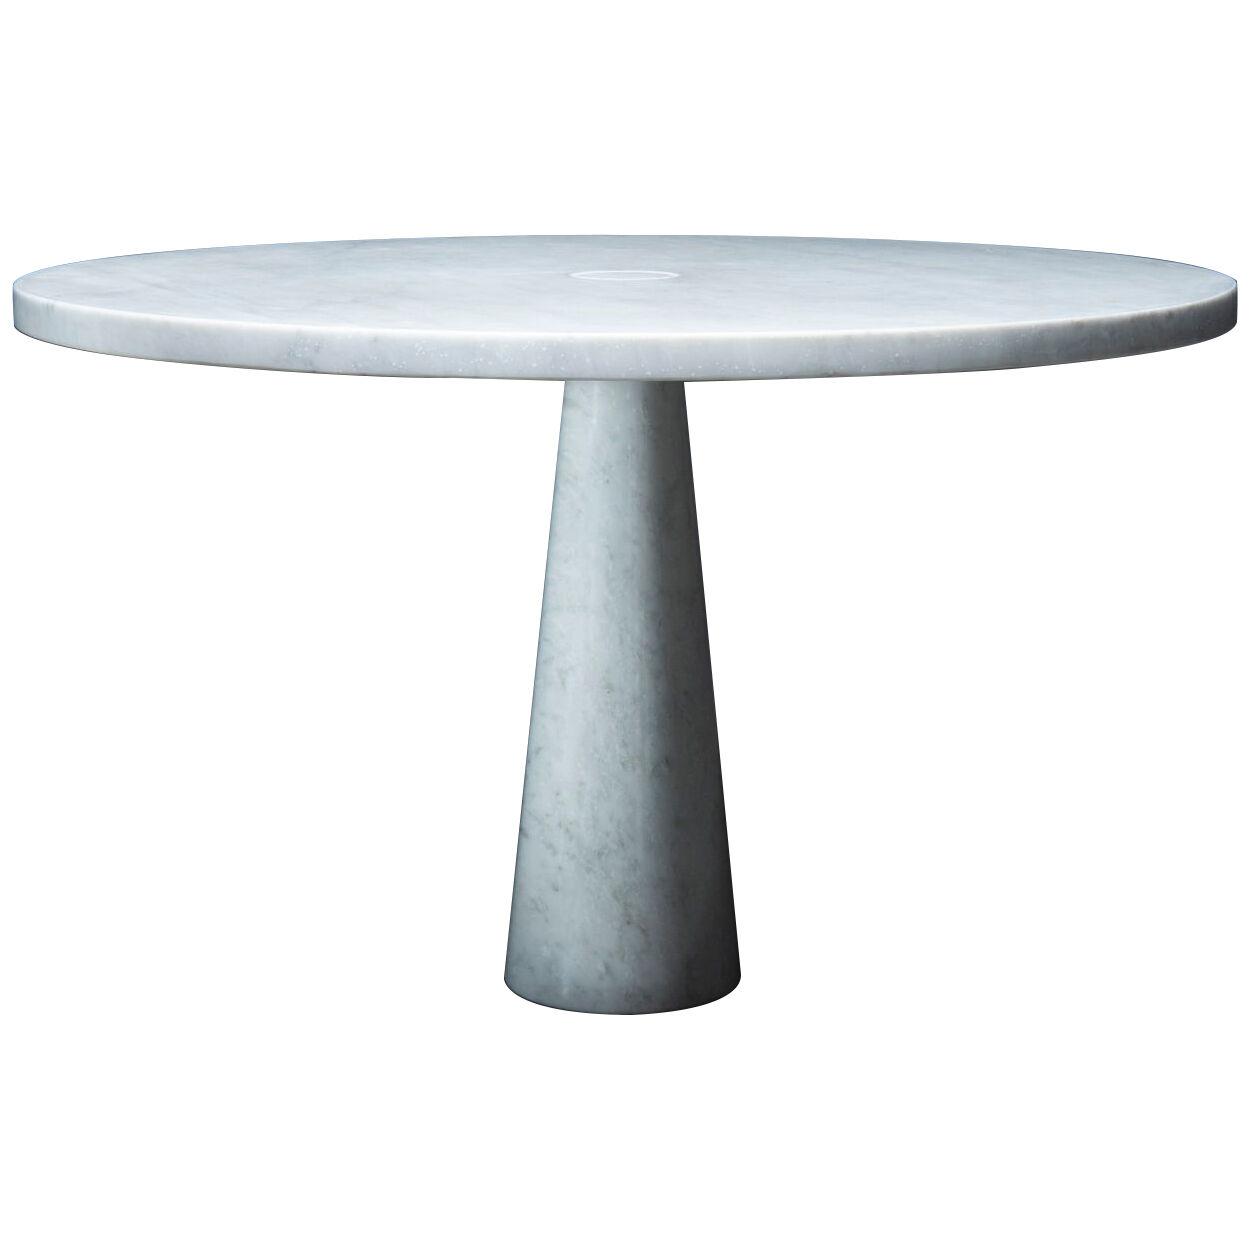 'EROS' Dining Table by ANGELO MANGIAROTTI for SKIPPER